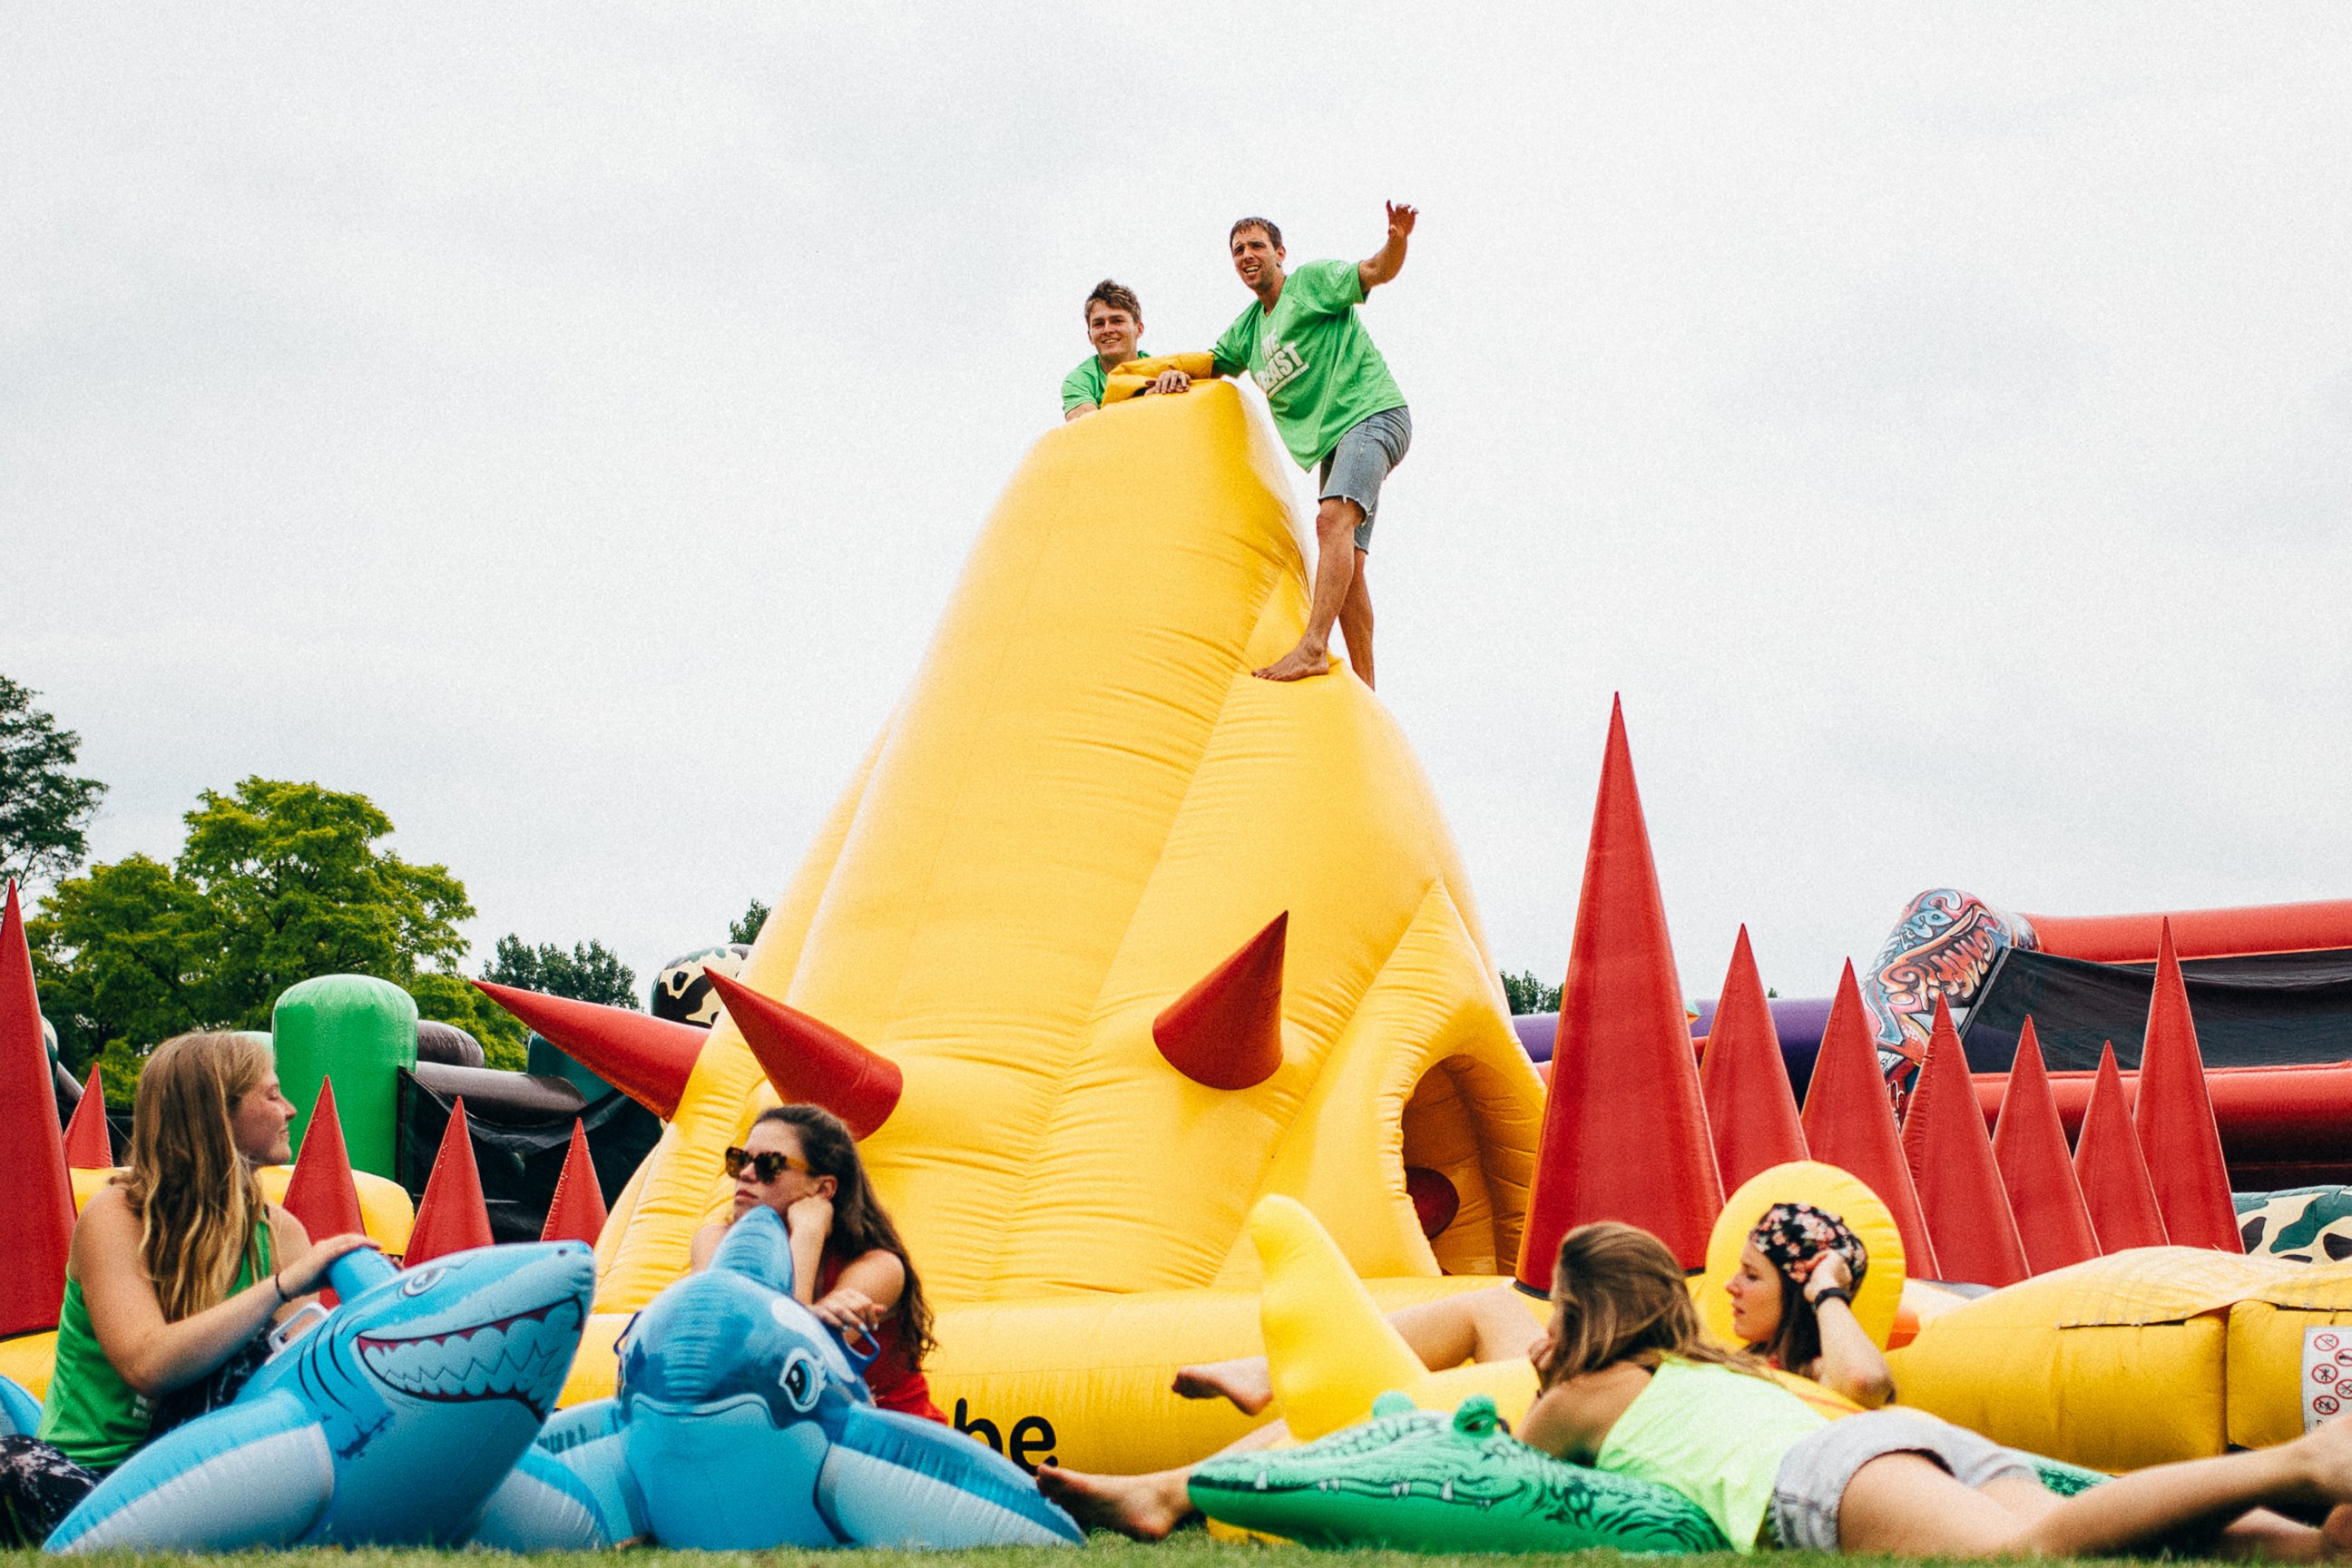 PHOTO: "The Beast" is the world's biggest bouncy castle.